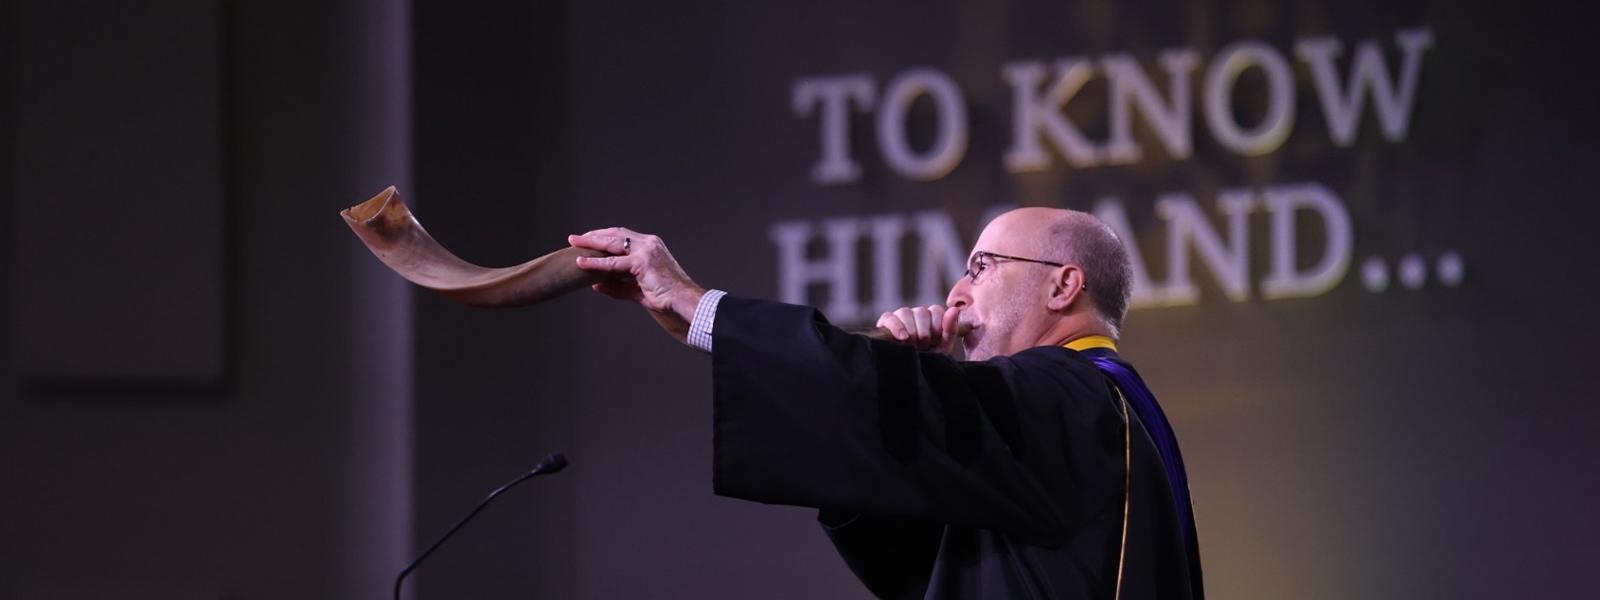 In a CIU tradition, Professor Emeritus Dr. Bryan Beyer blows the shofar at the end of commencement.